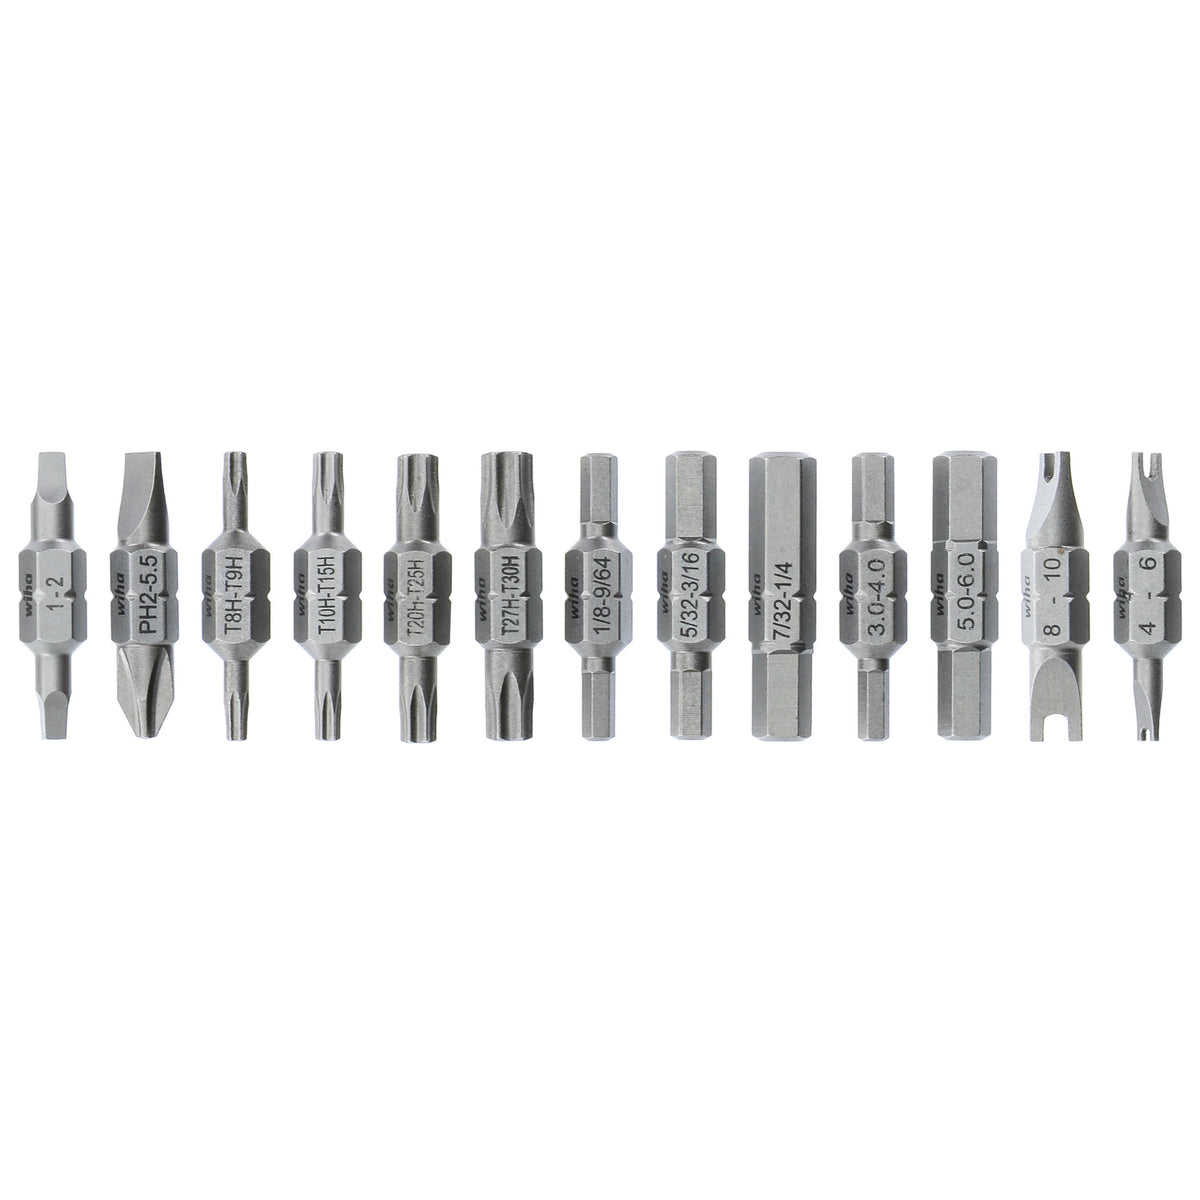 Wiha 77783 13 Piece Double Ended Security Bit Reload for 26-in-1 Ultra Driver